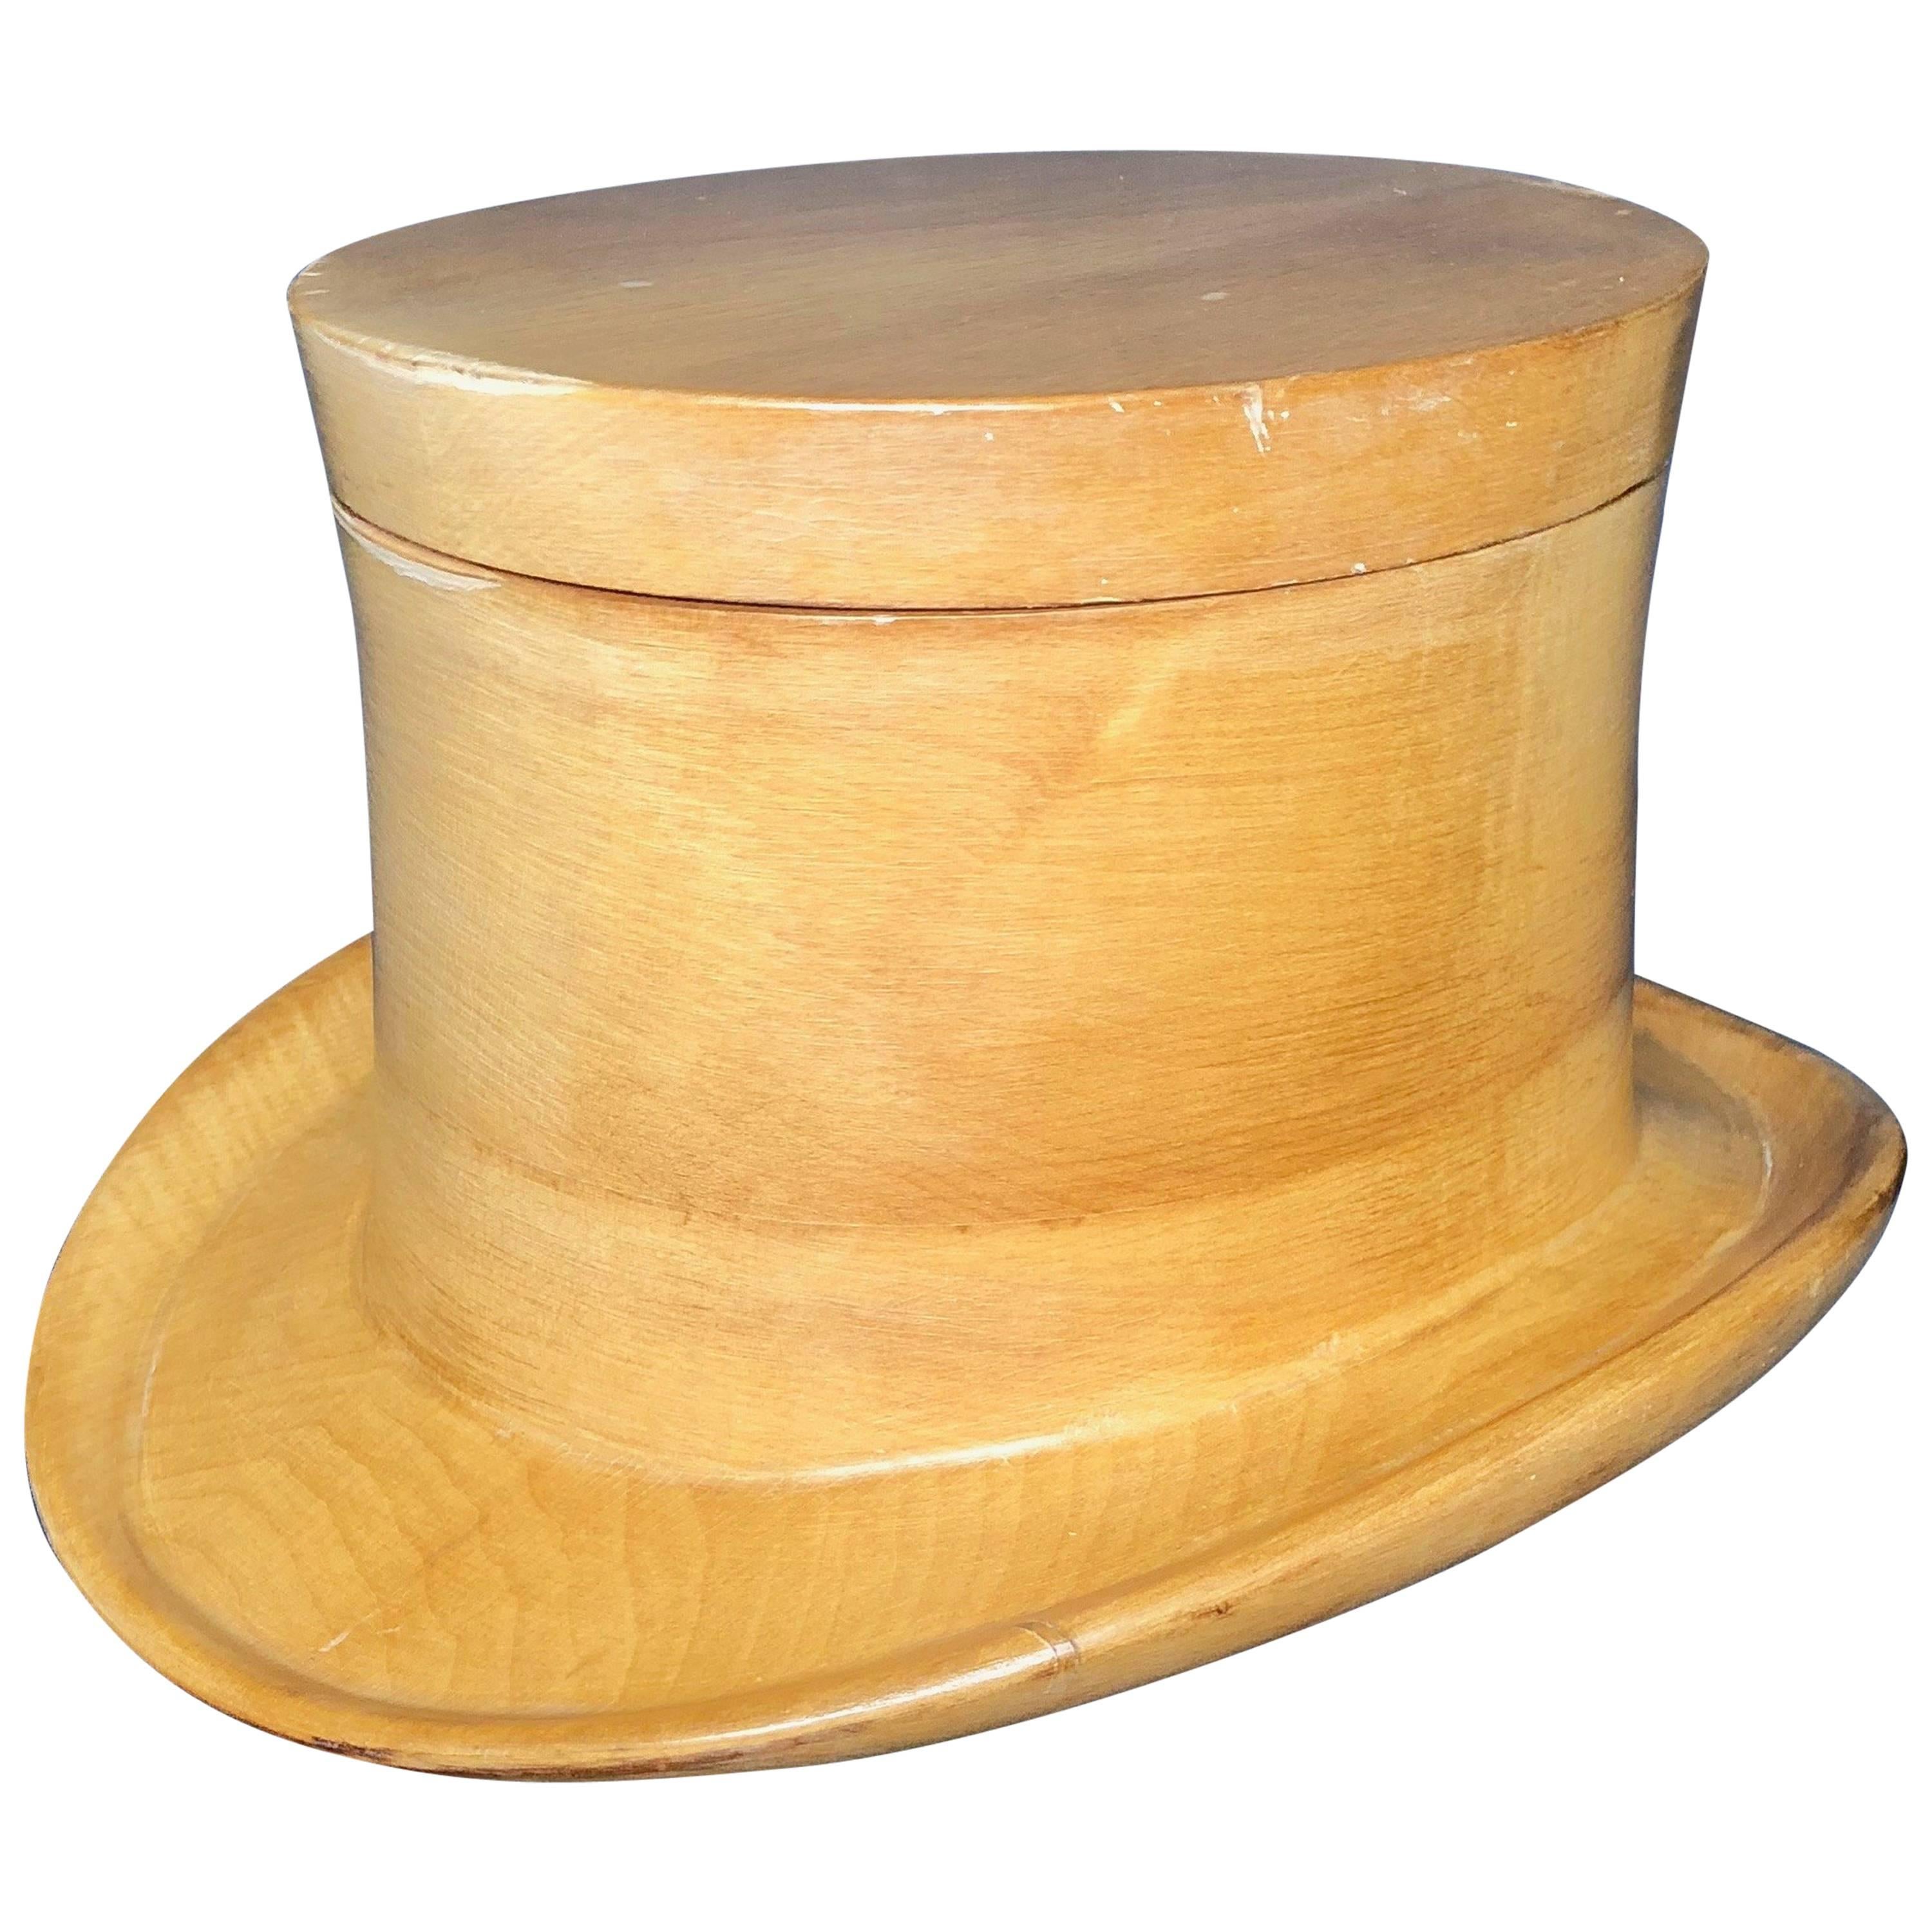 Wooden Ice Bucket in the Shape of a Top Hat, 1970, Mid-Century Modern